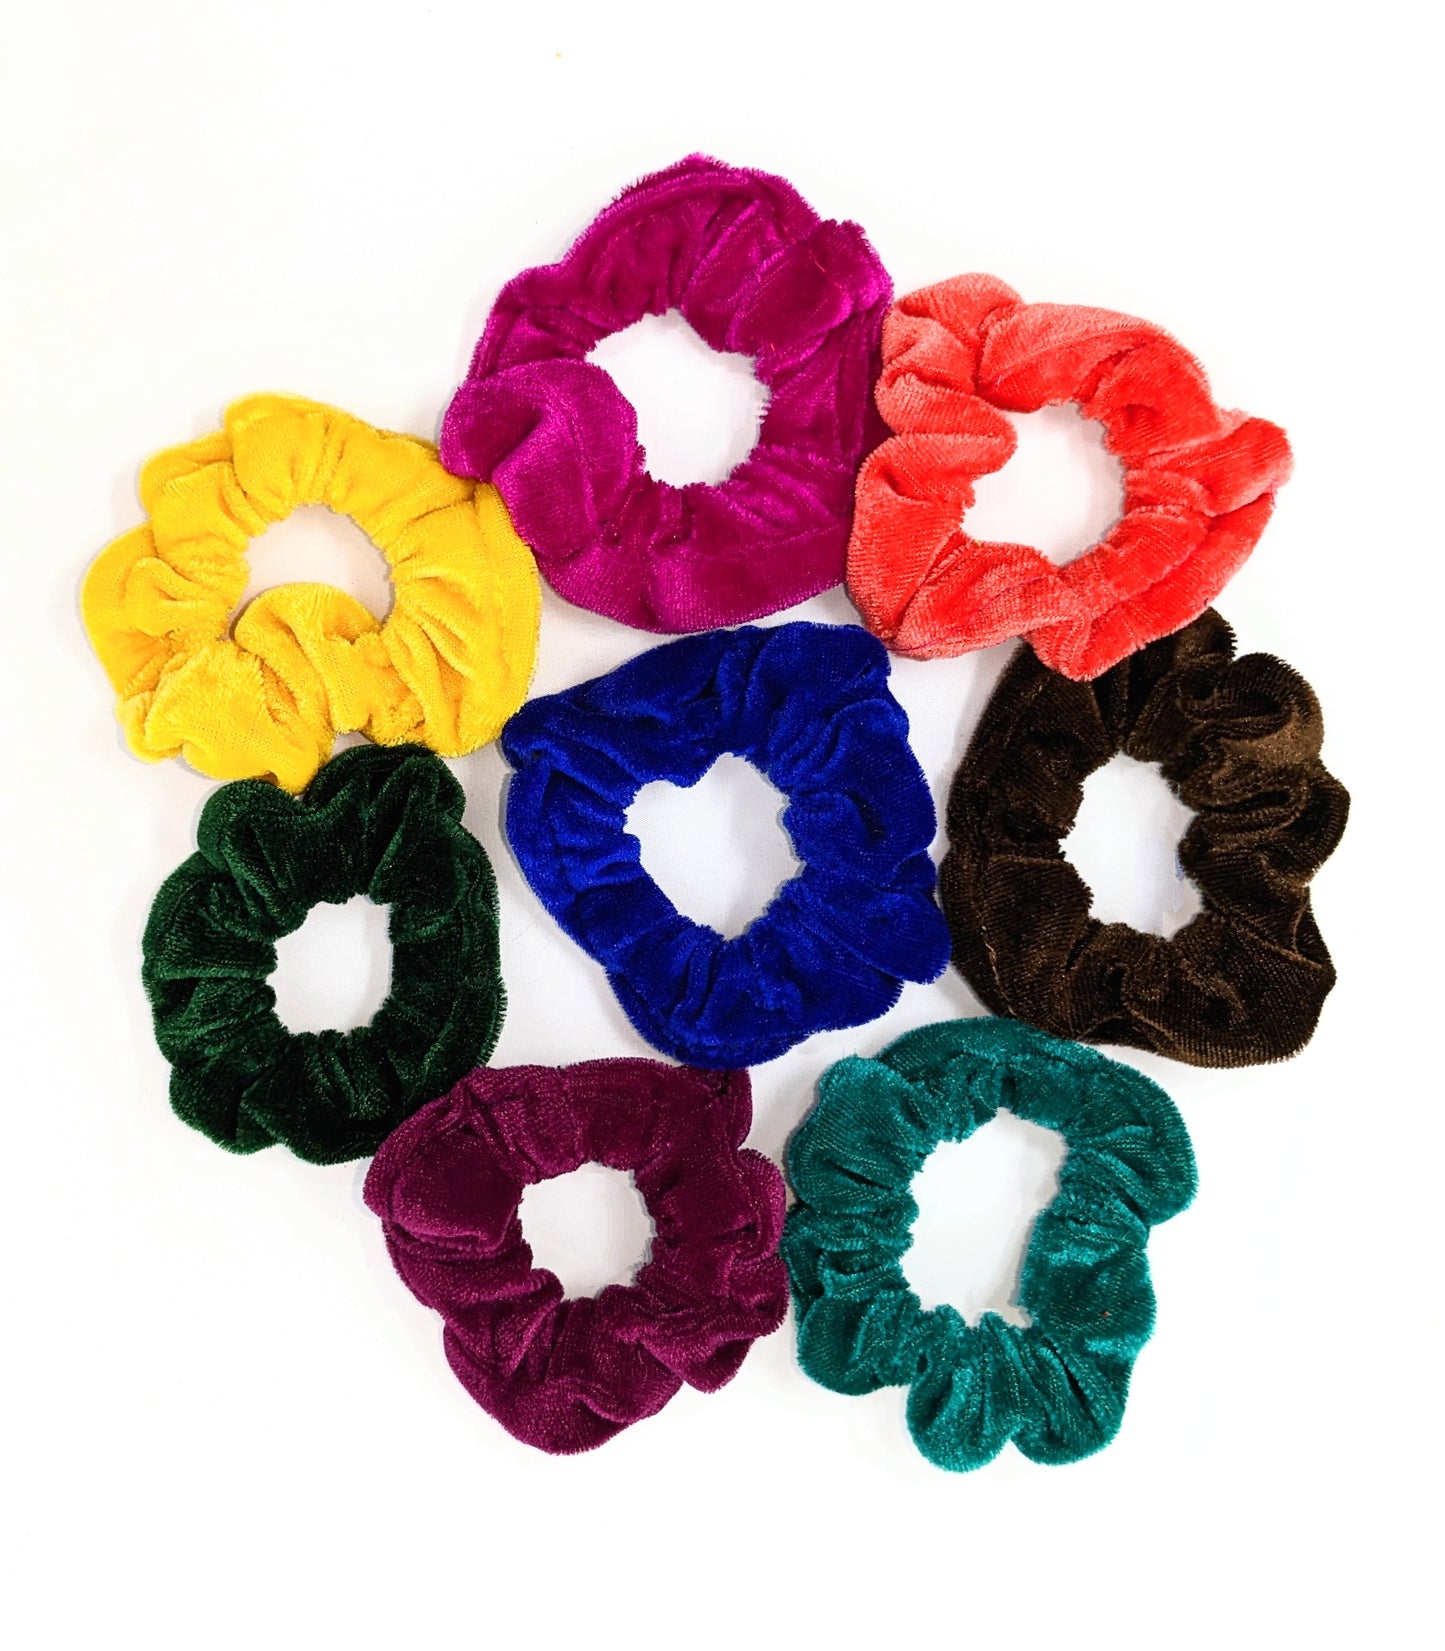 24 Pieces Assorted Satin Hair Bands - Cute and Soft Scrunchies - No crease hair ties - Girls hair accessories